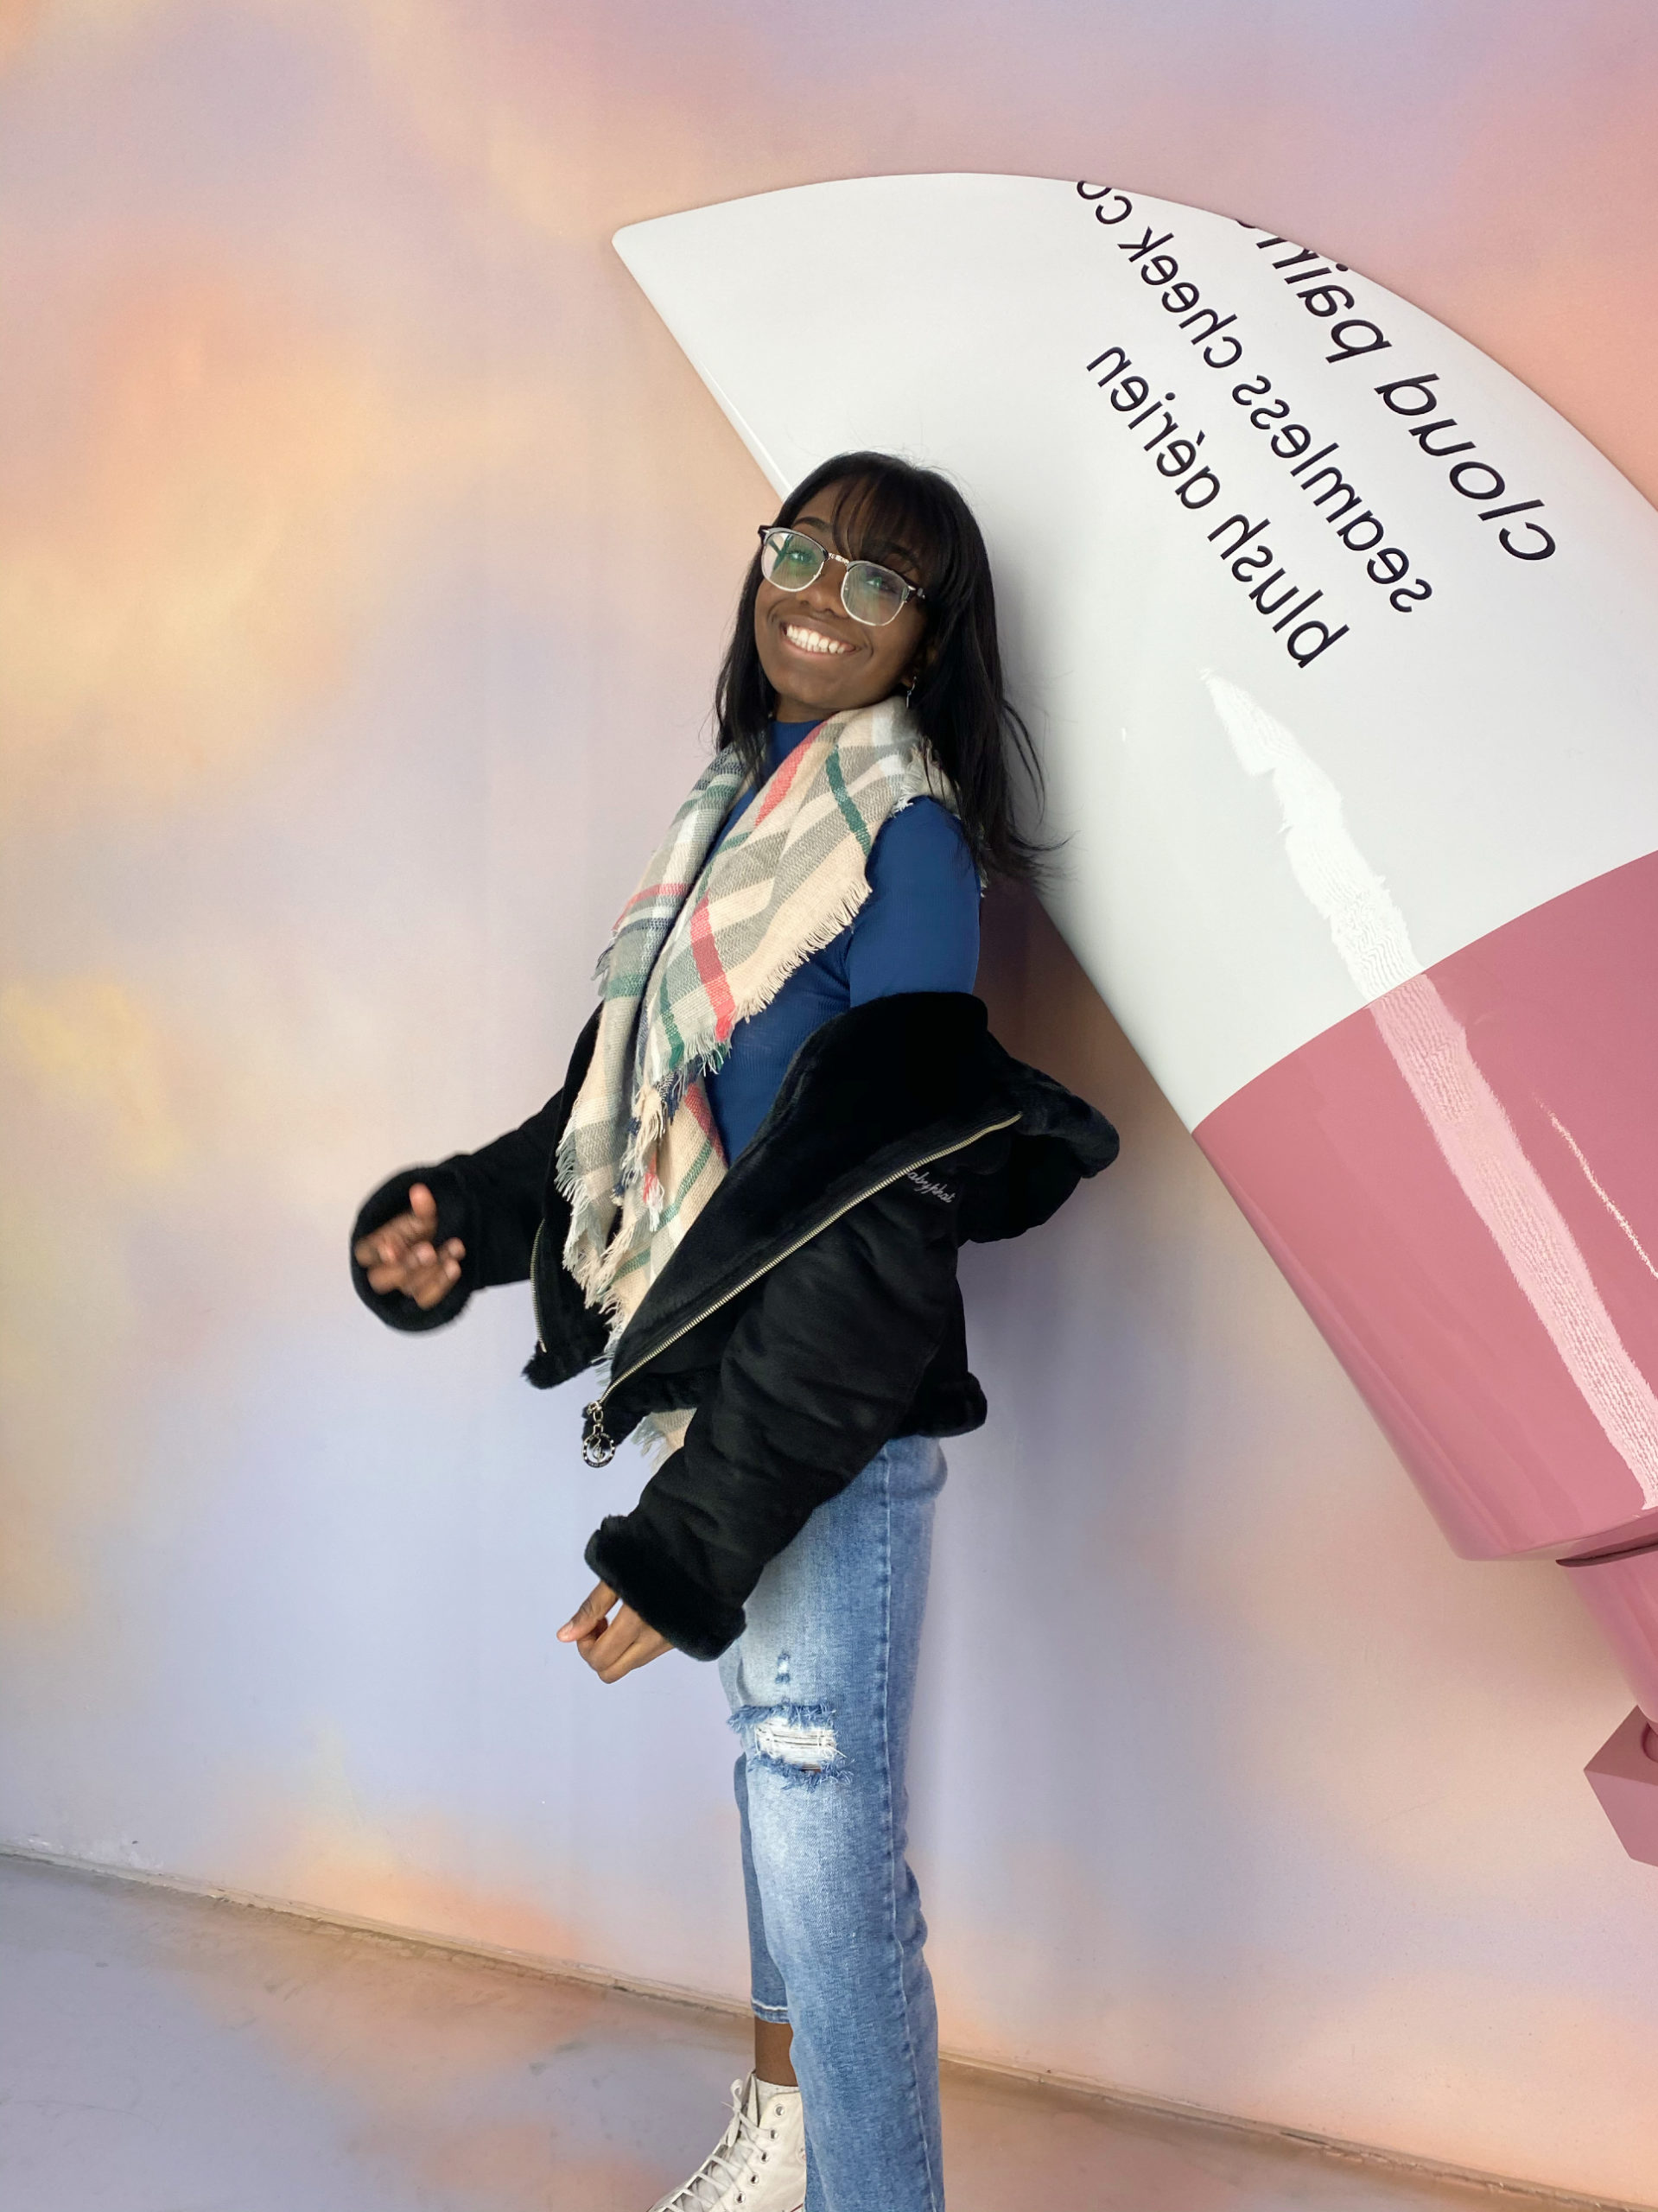 Imani hanging out at FIDM, LA, working on personal growth